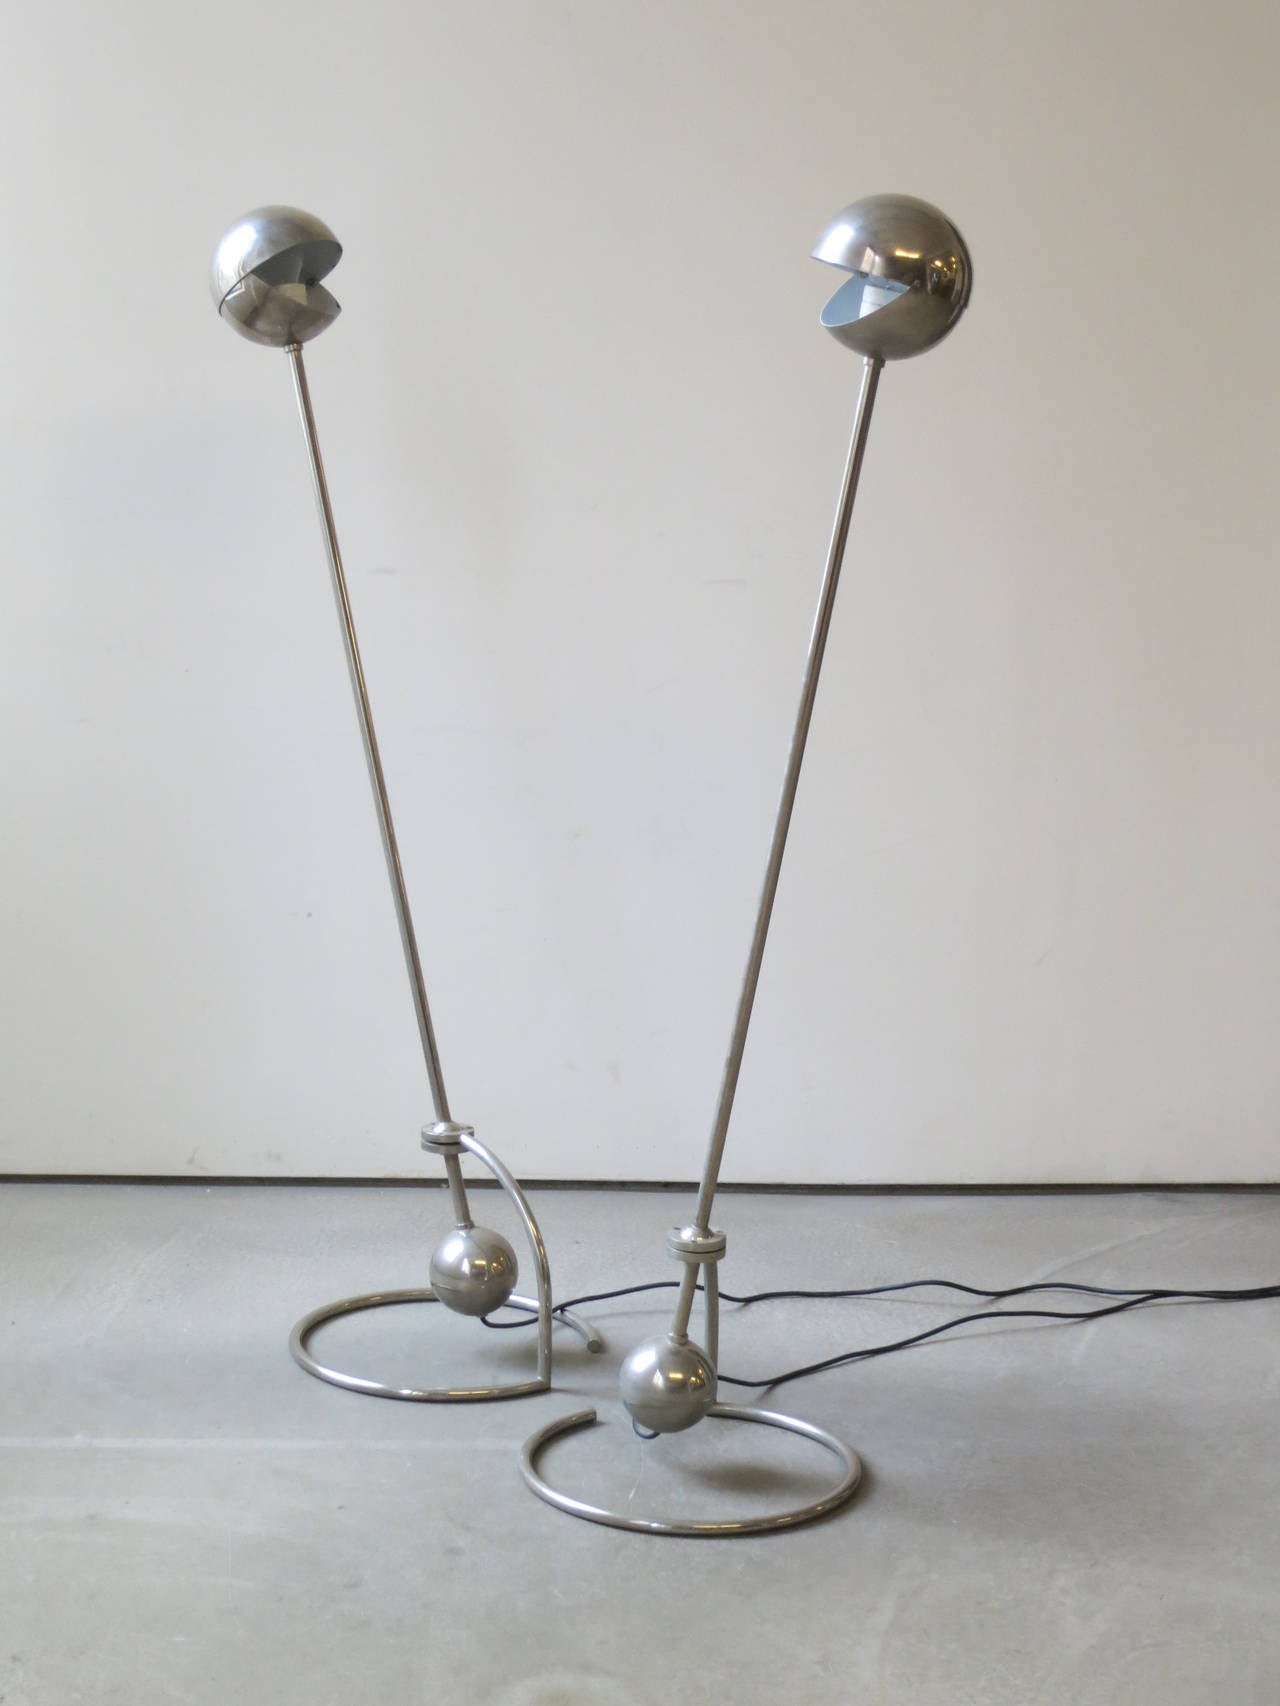 Pair of Desny Standing Lamps, by Woka, Designed 1920s. These standing lamps were designed in France in the 1920s by Desny and manufactured later by Woka in Austria. The top shade opens and closes, lighting forward or back. The upright frame pivots